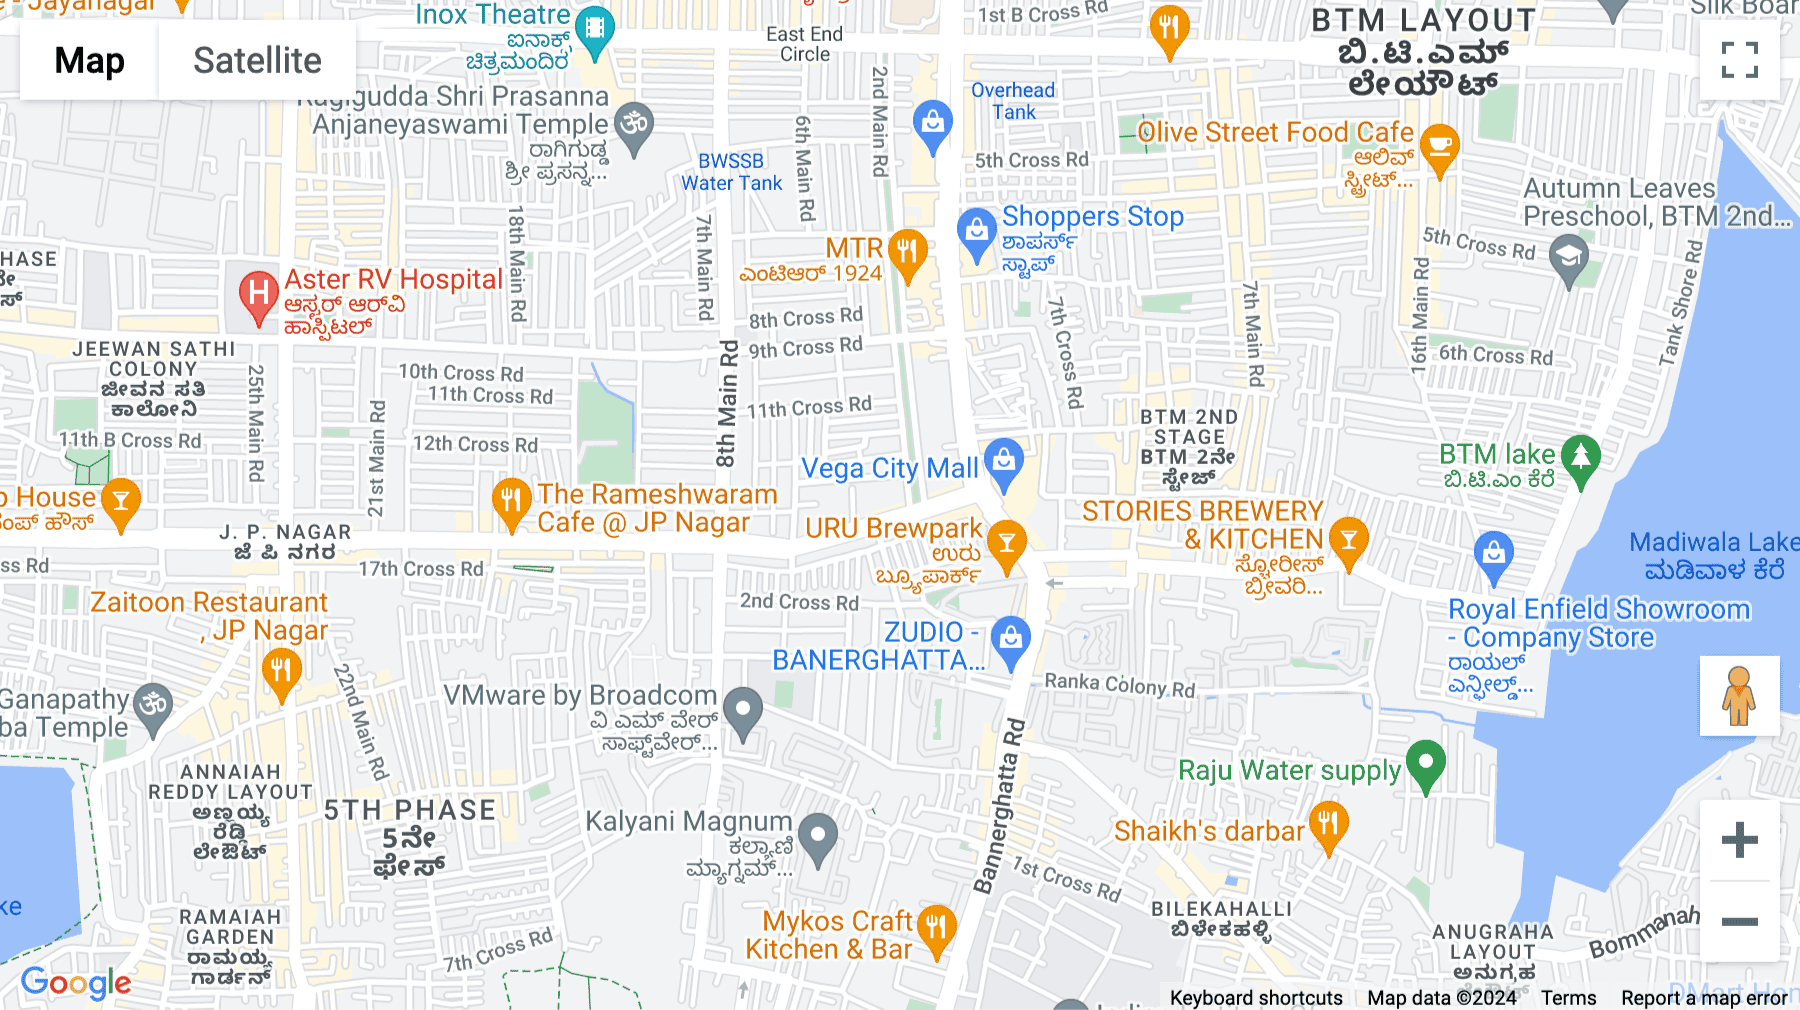 Click for interative map of 3rd Floor, Site No. 74, Mass Complex, 15th Cross Road Sarakki Industrial Area, 3rd Phase, J. P. Nagar, Bangalore